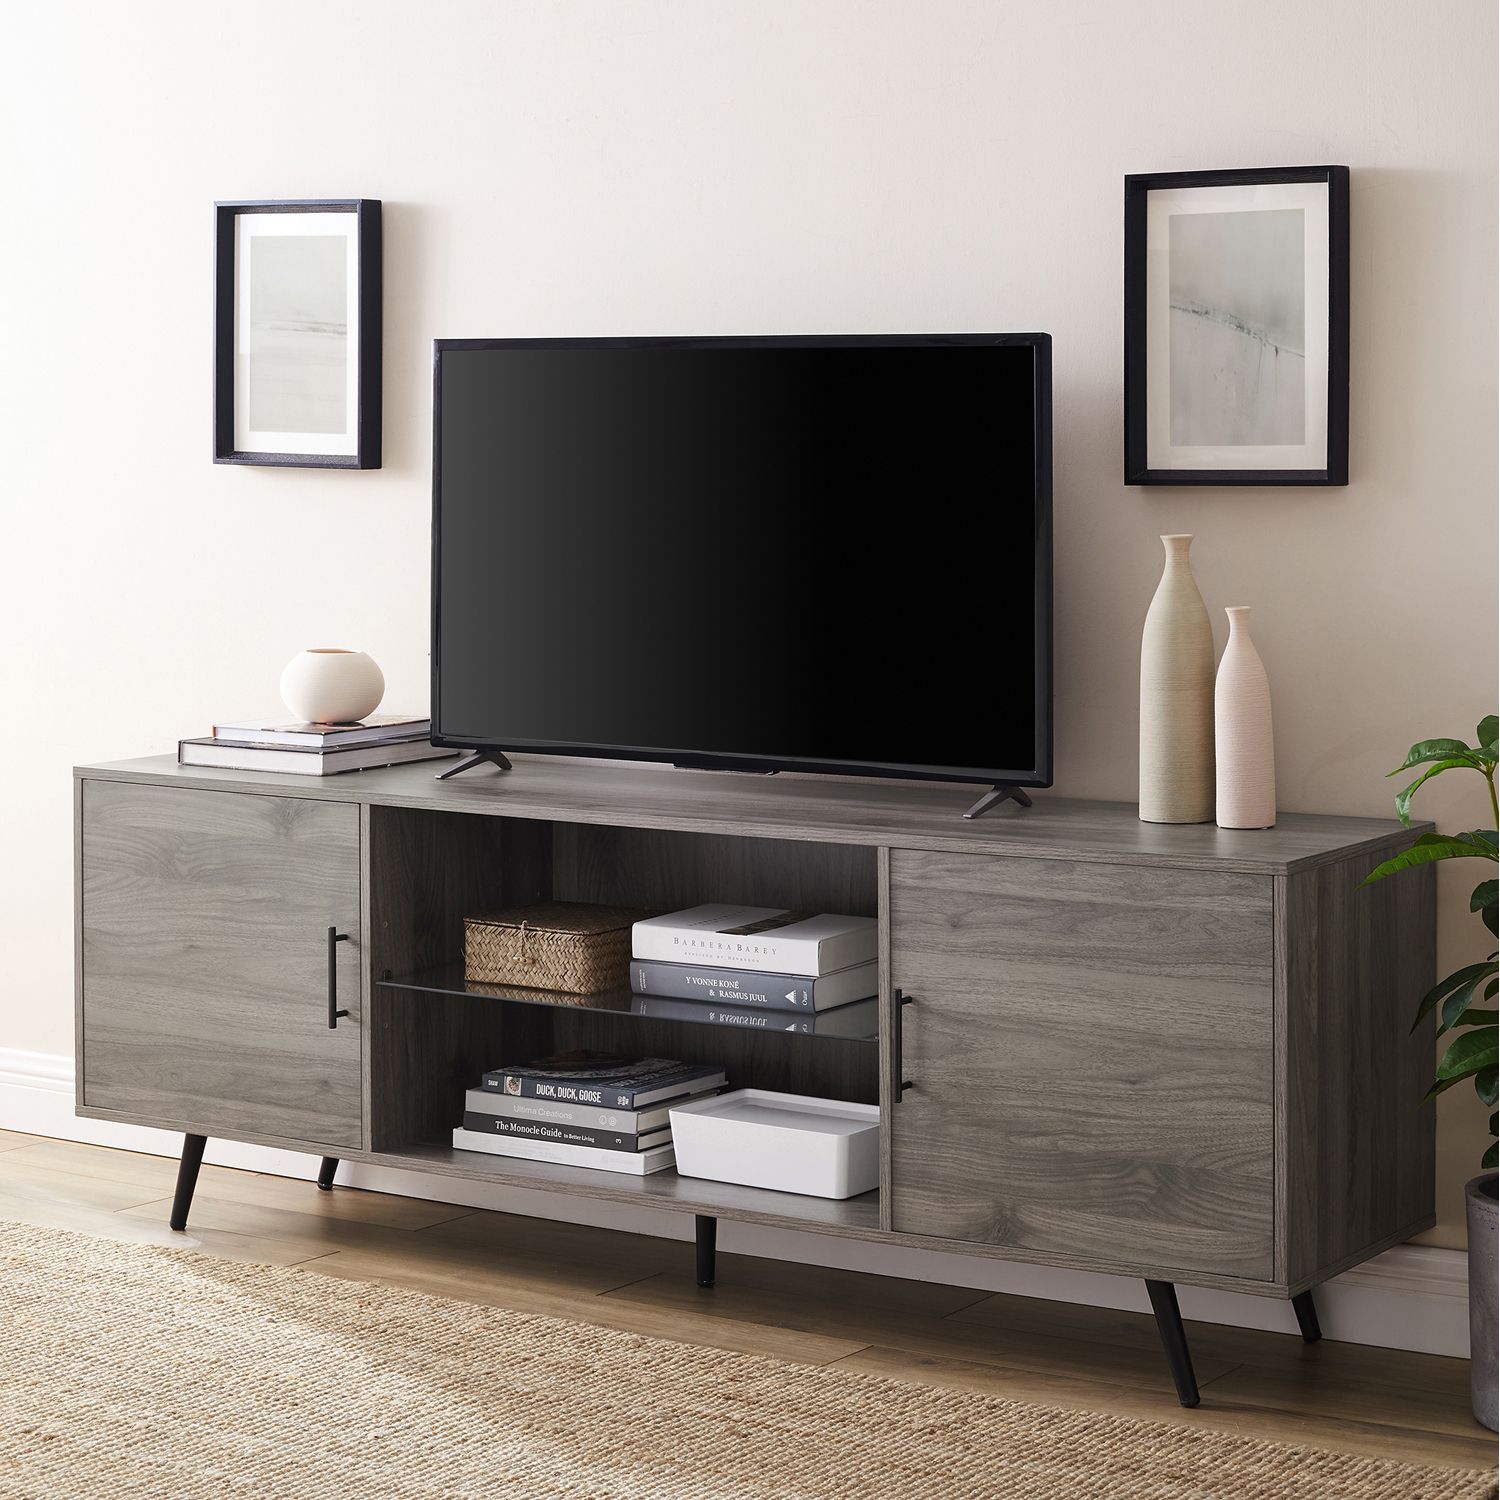 Wide Tv Stand With Glass Shelf – Pier1 With Indi Wide Tv Stands (View 7 of 15)